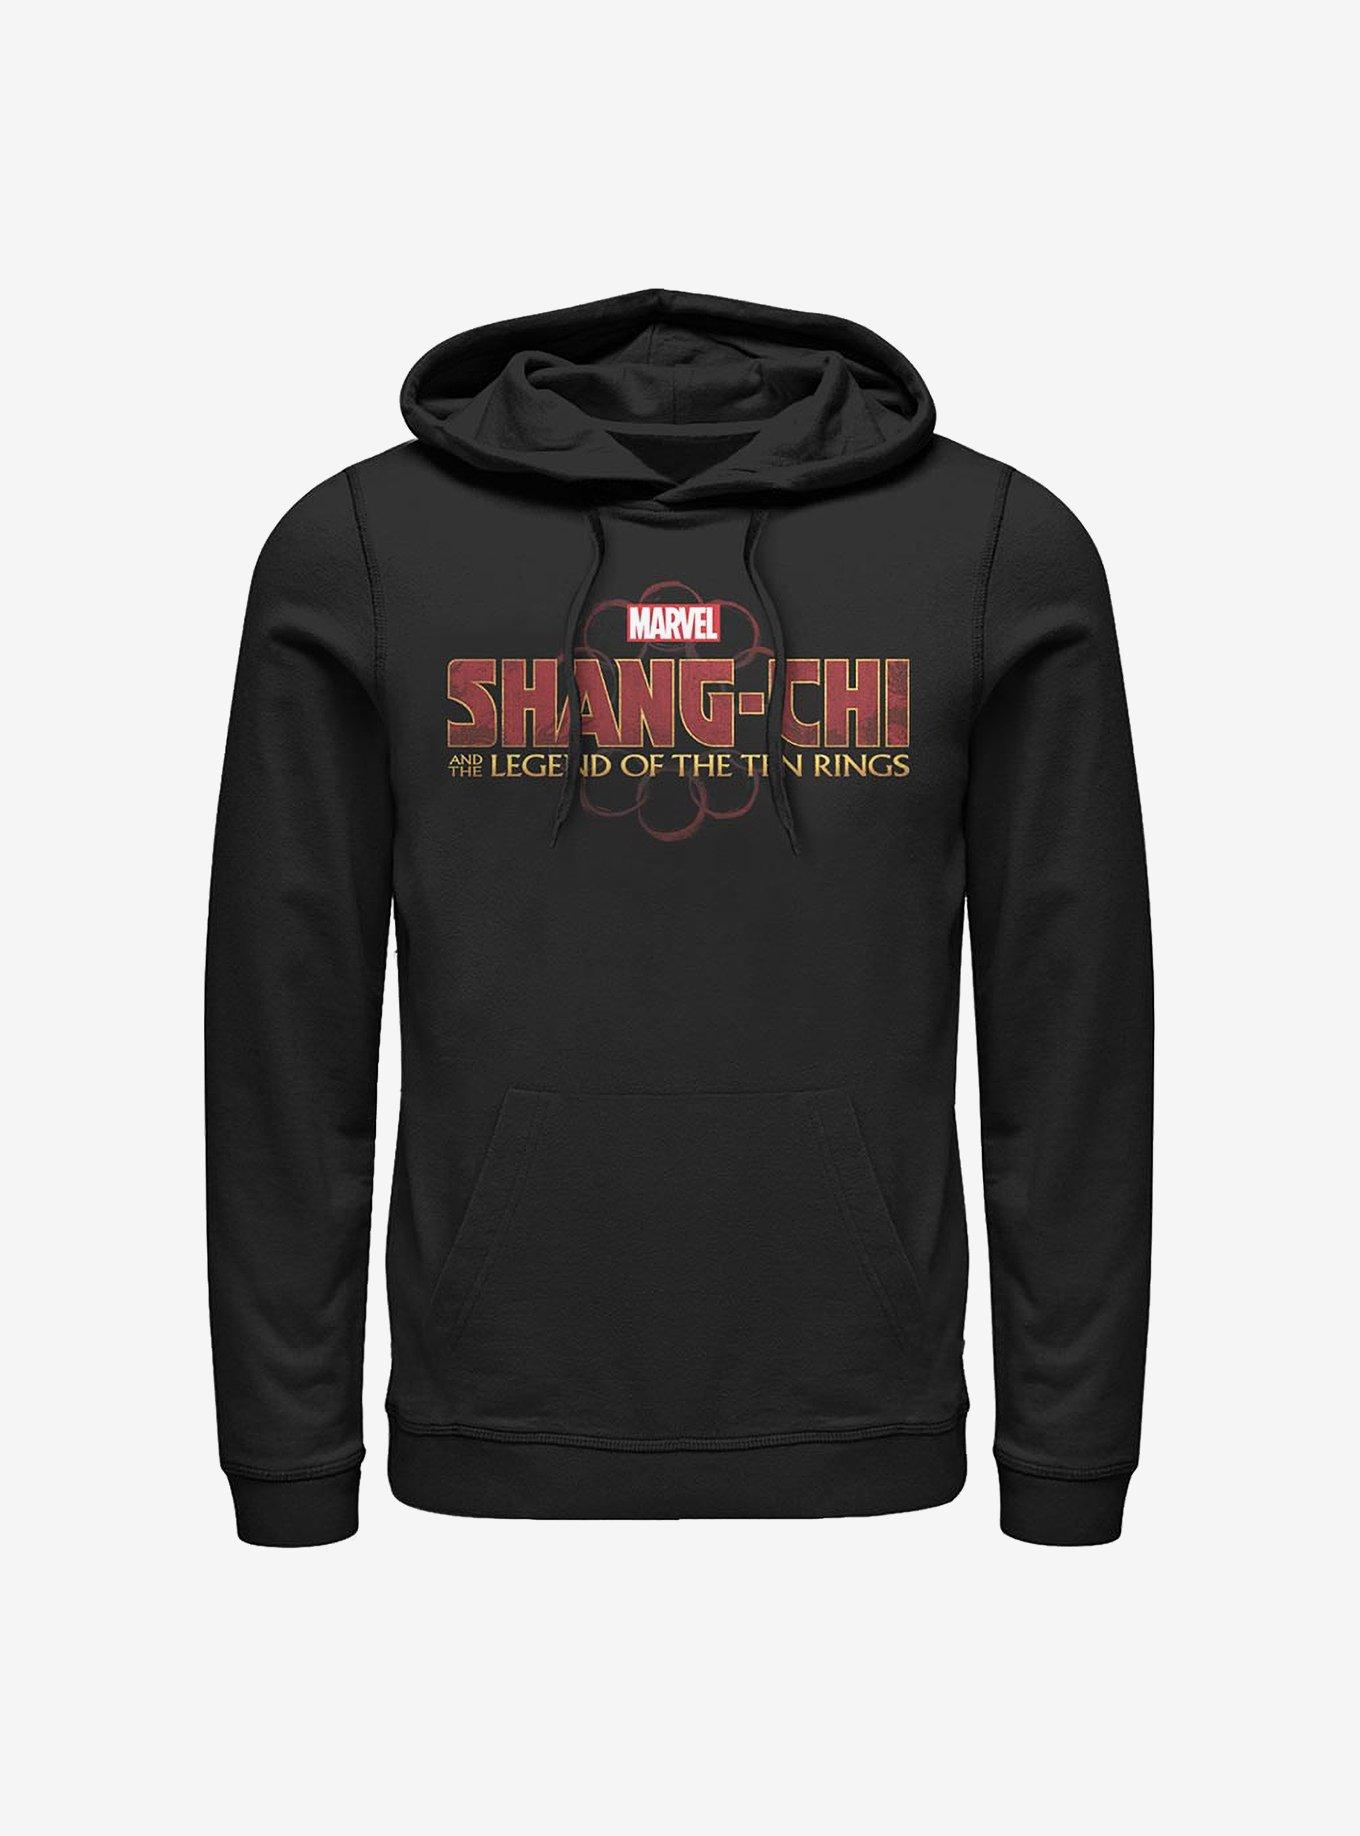 Marvel Shang-Chi And The Legend Of The Ten Rings Title Hoodie, BLACK, hi-res